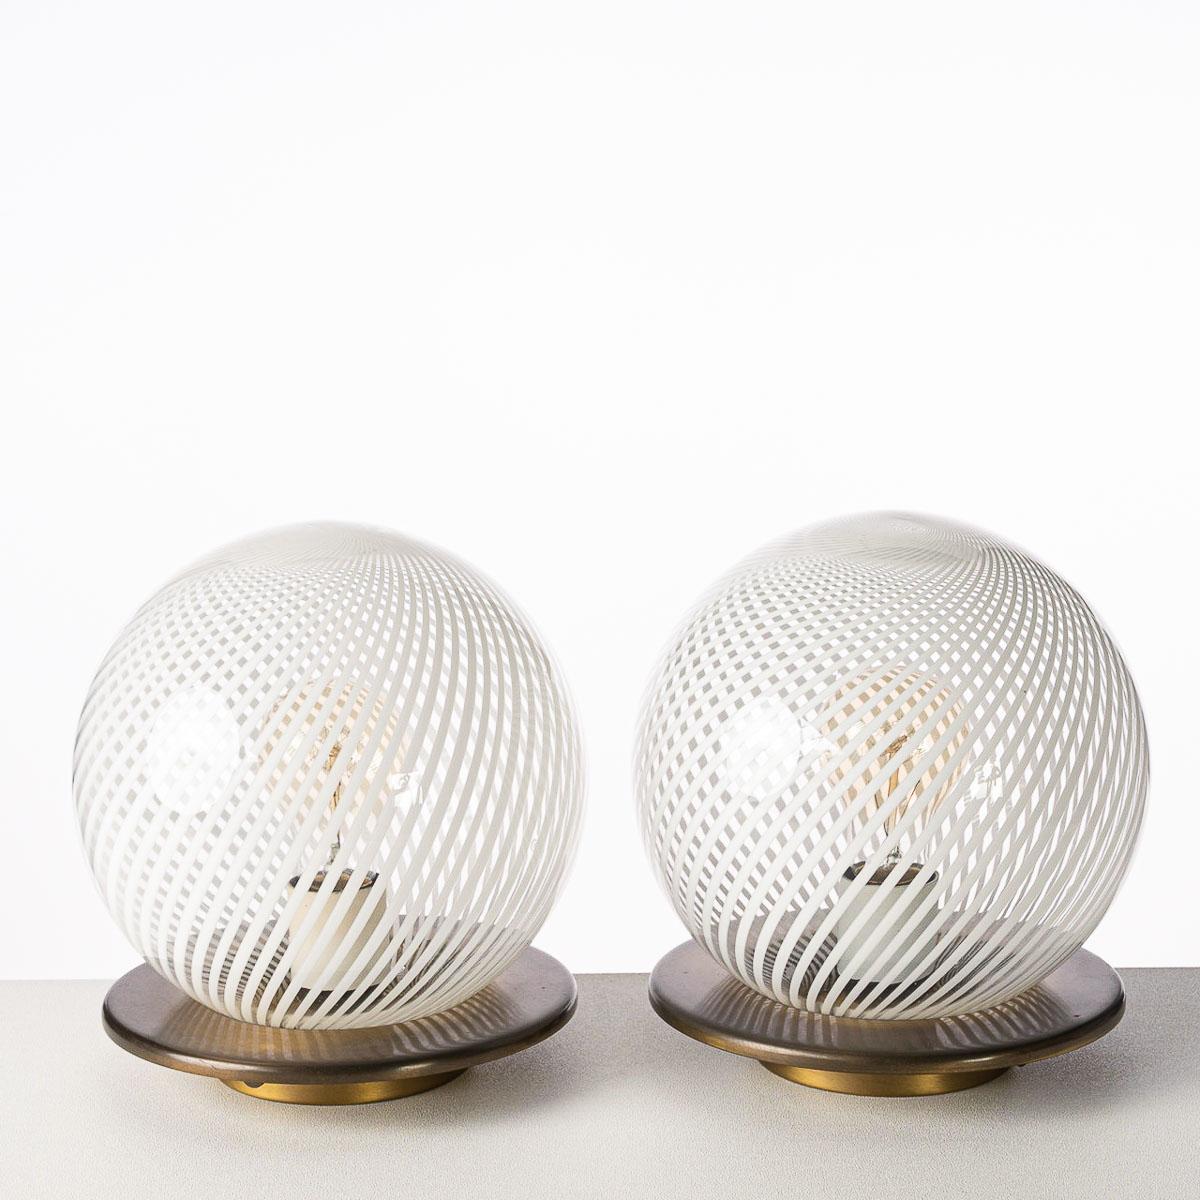 These Classic table lamps are perfectly hand blown from white and clear Murano glass, attributed to Venini, circa 1970.